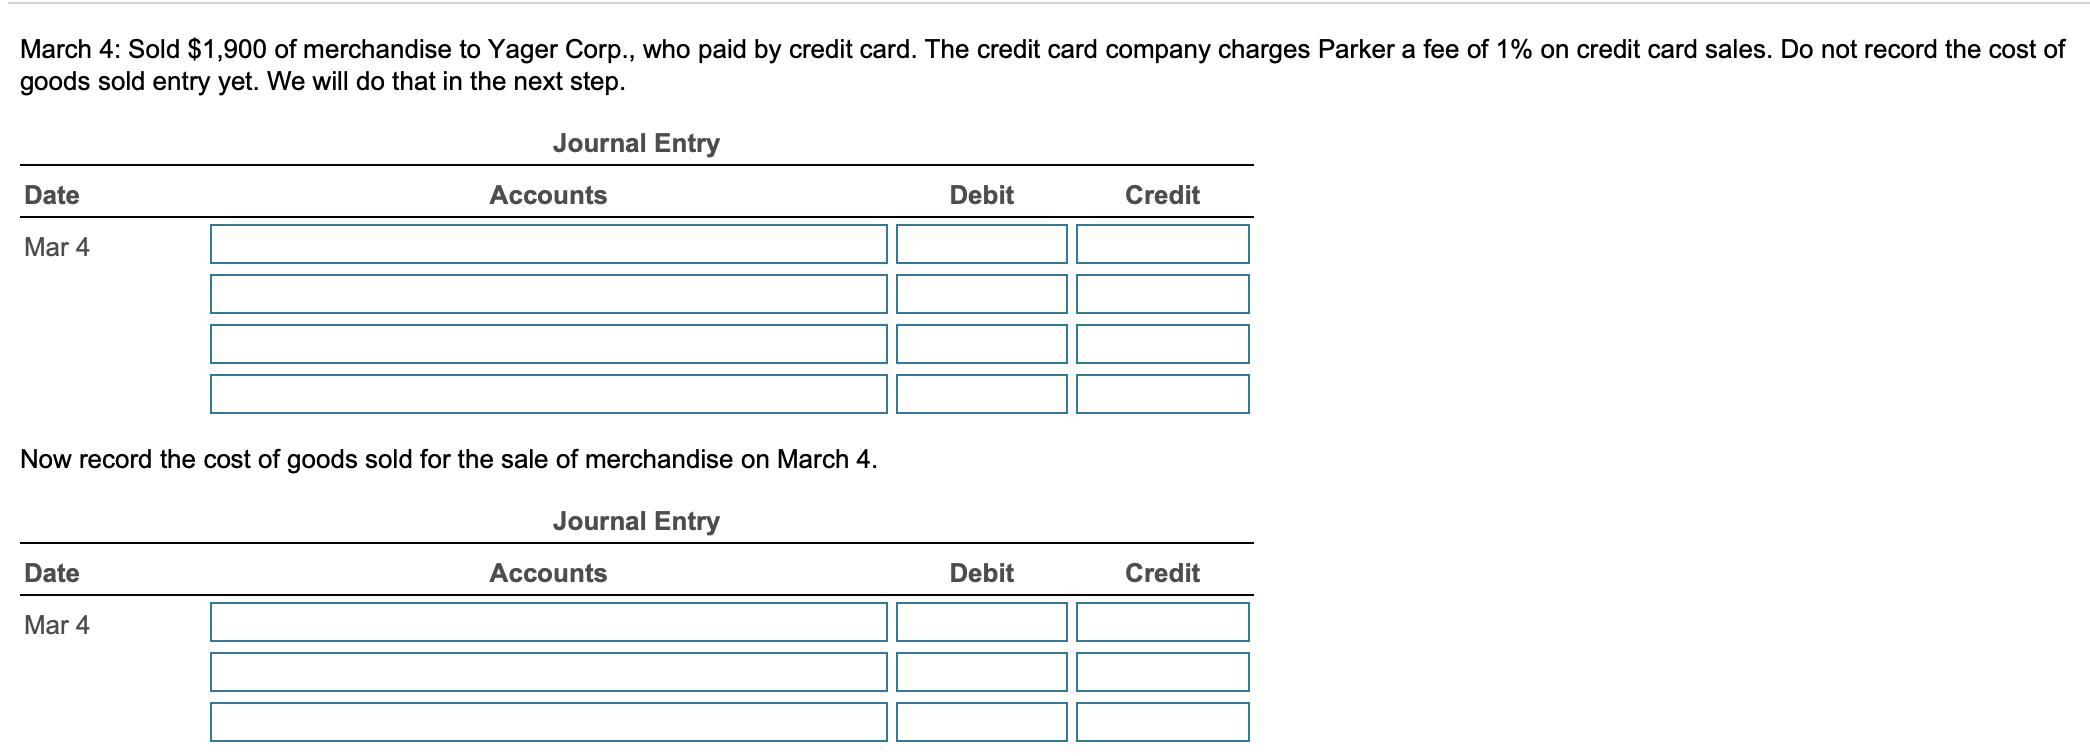 March 4: Sold $1,900 of merchandise to Yager Corp., who paid by credit card. The credit card company charges Parker a fee of